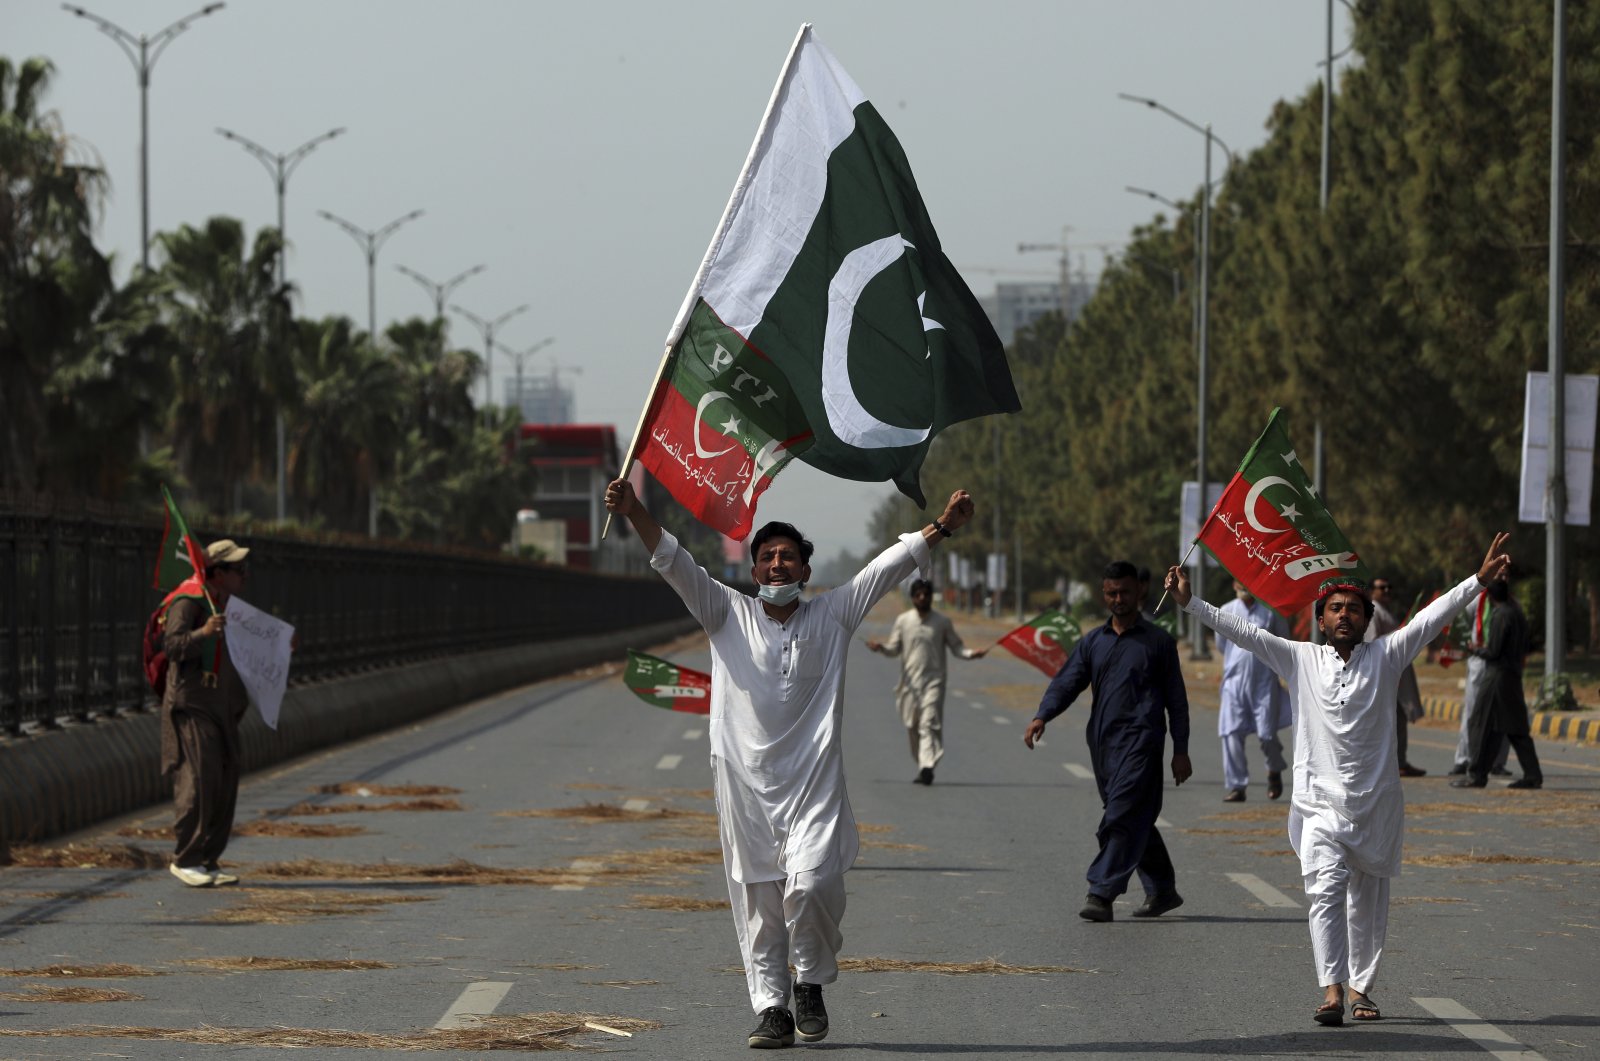 Supporters of ruling party Pakistan Tehreek-e-Insaf (PTI) chant slogans during a protest in Islamabad, Pakistan, April 3, 2022. (AP Photo)